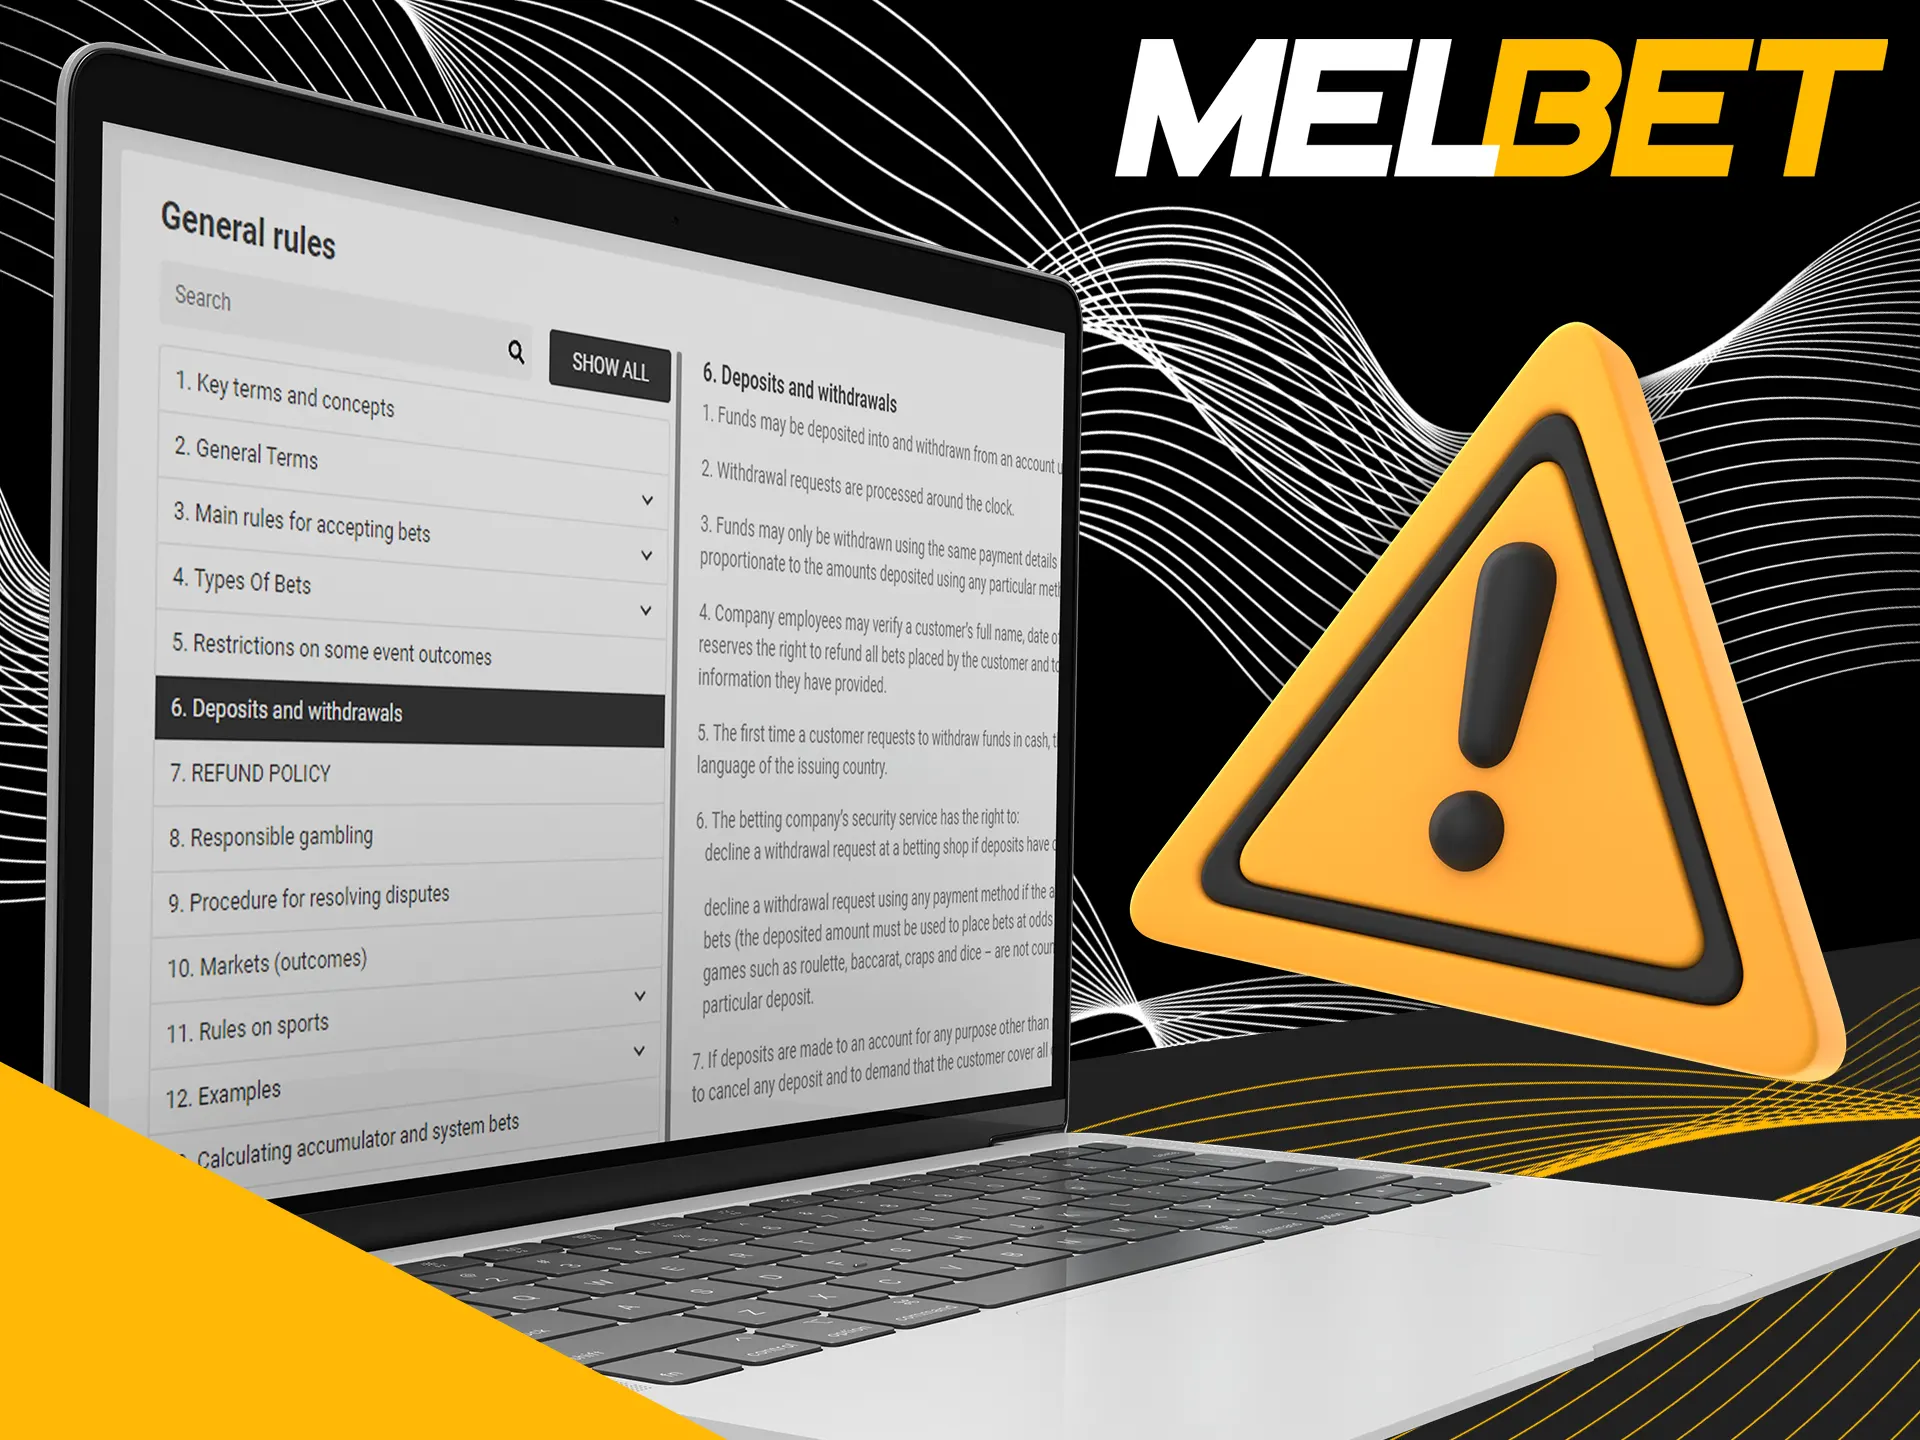 Read Melbet rules before withdrawing funds.